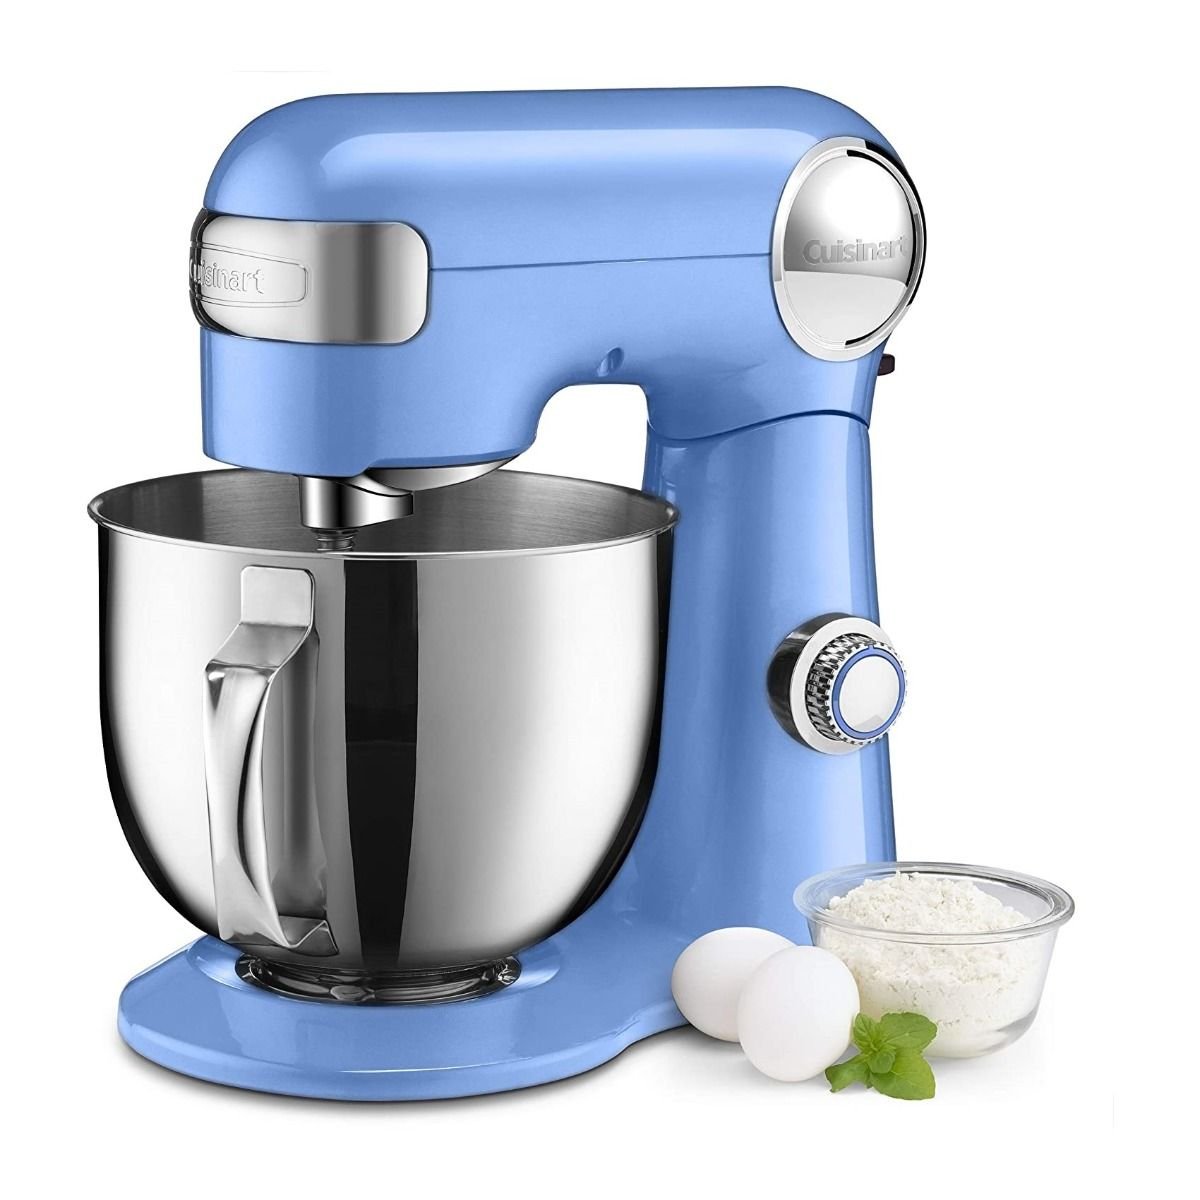 Cuisinart Salt and Pepper Set 2-in-1 Style - electric - Blue